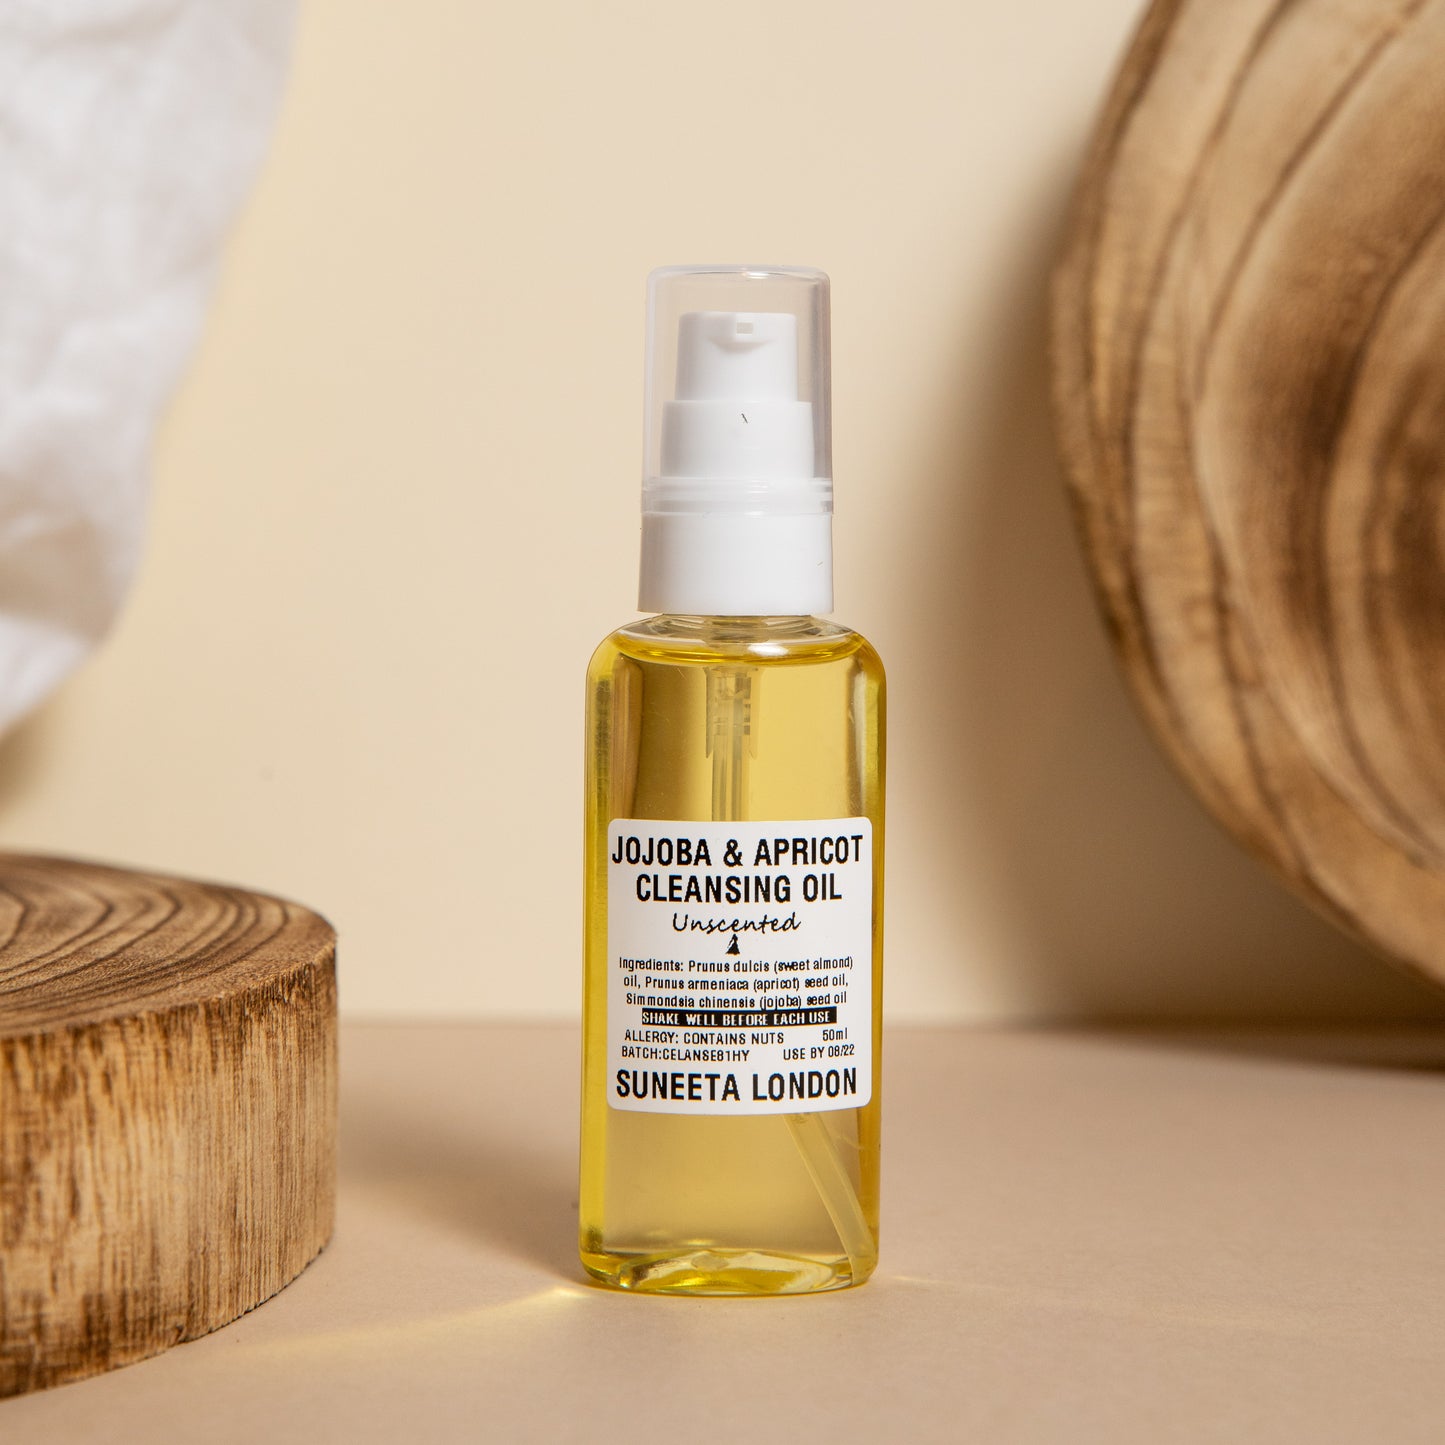 Jojoba & Apricot Cleansing Oil (unscented)